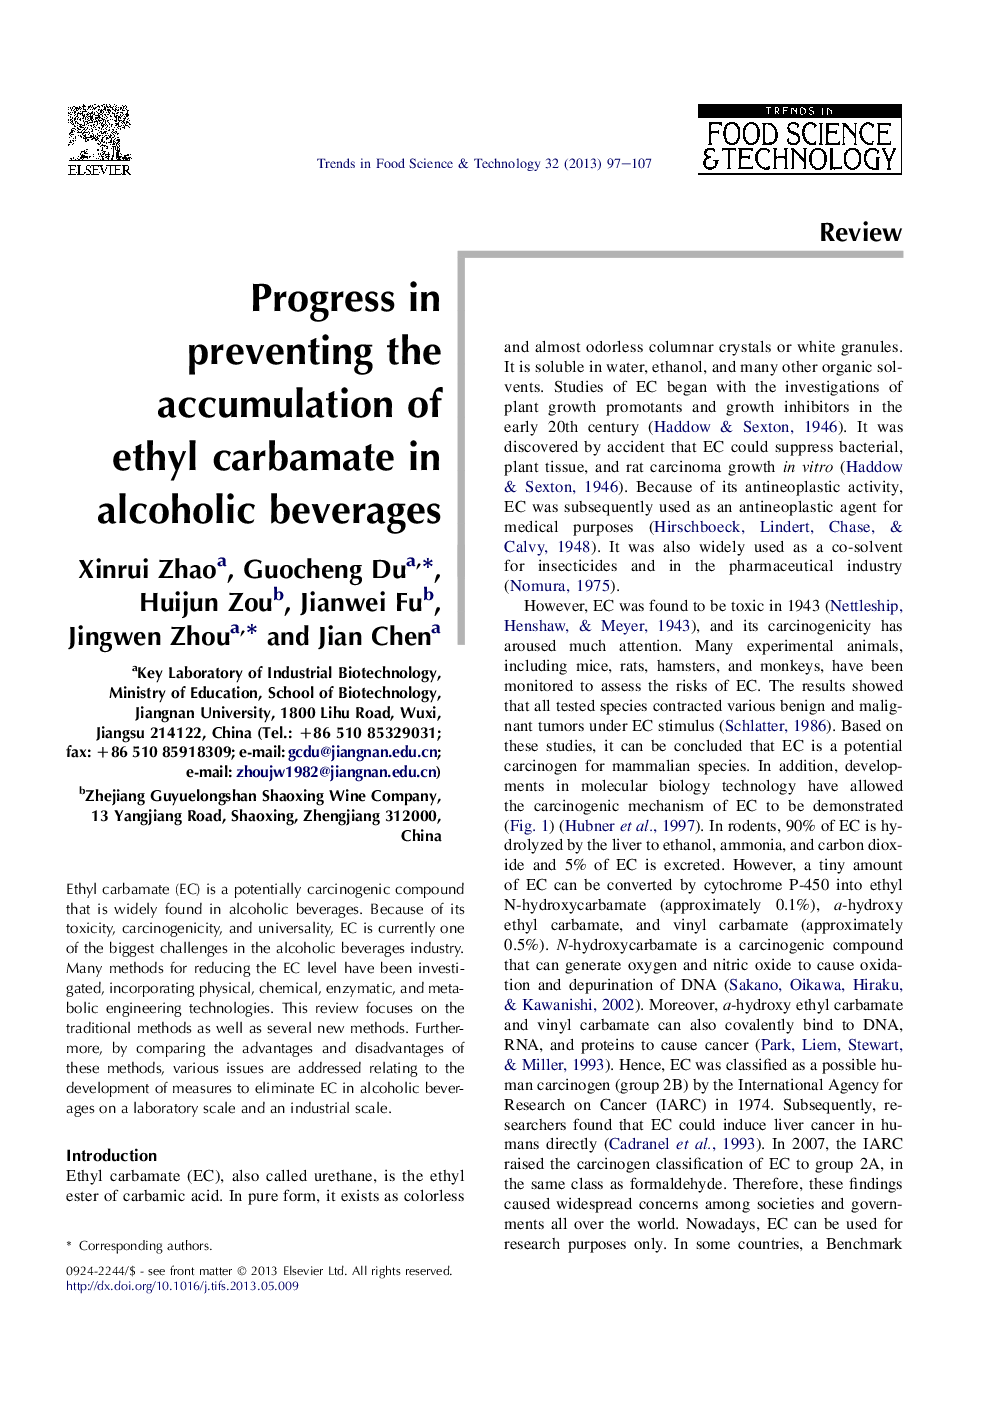 Progress in preventing the accumulation of ethyl carbamate in alcoholic beverages